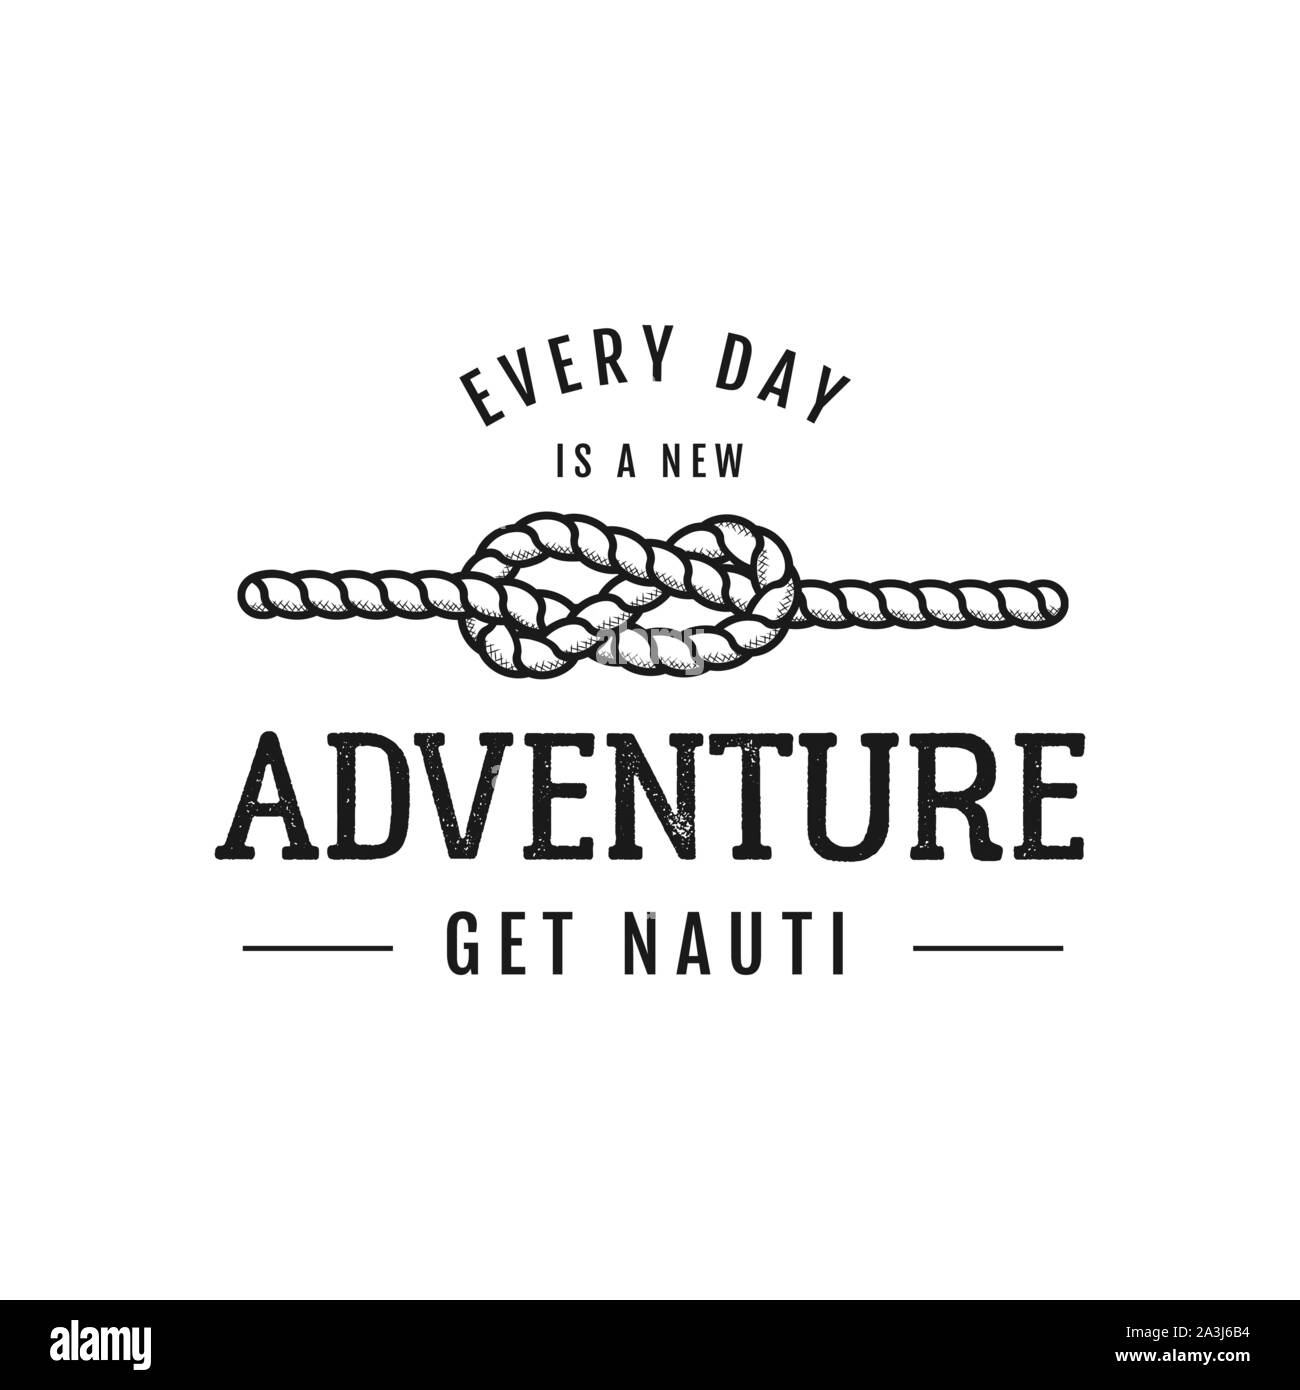 Nautical adventure style vintage print design for t-shirt, logos or ...